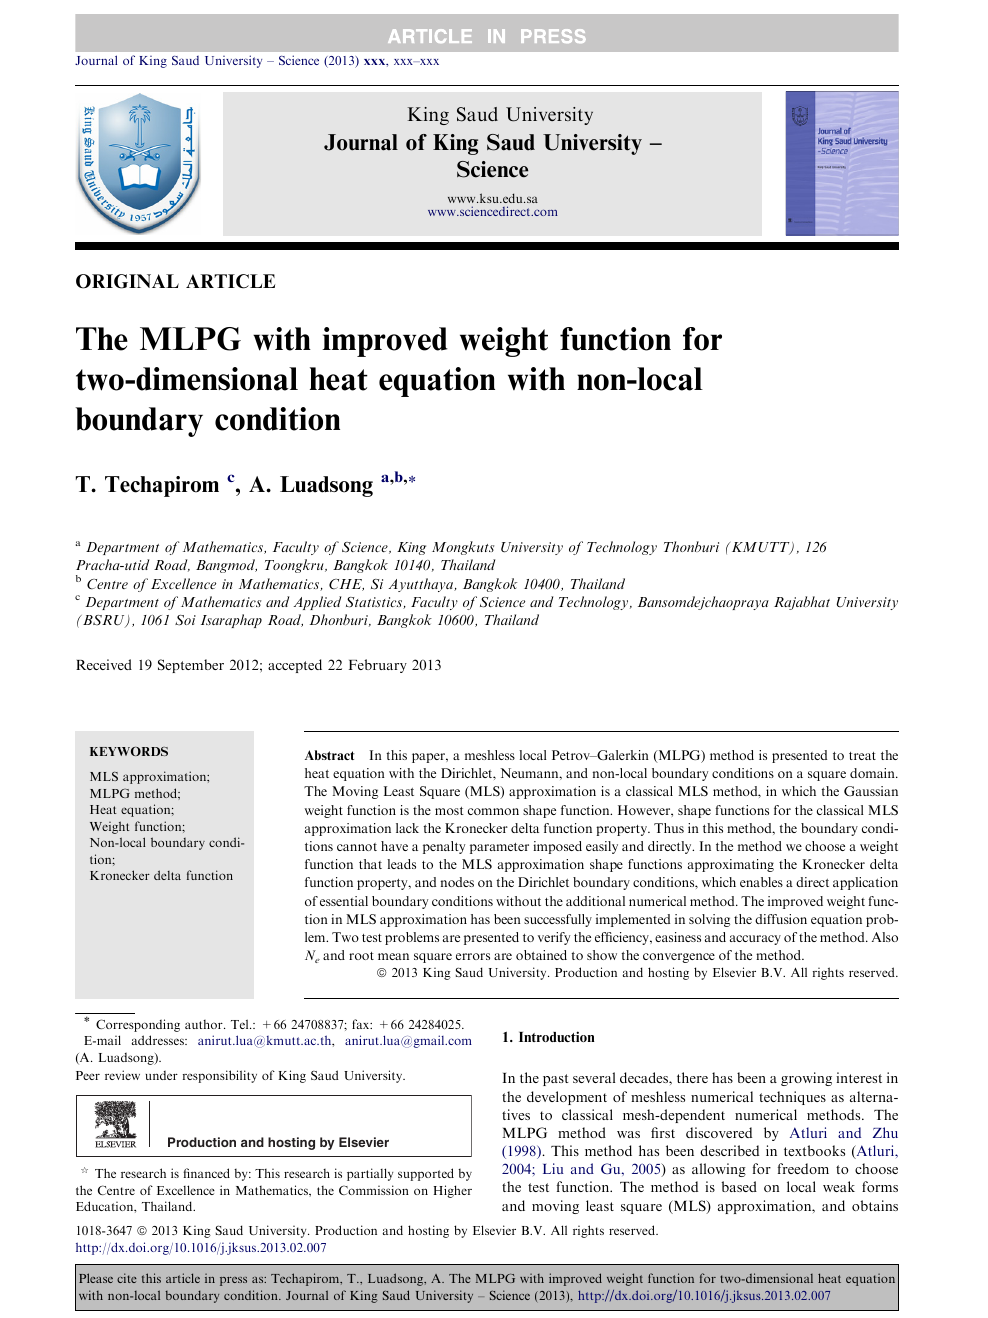 The Mlpg With Improved Weight Function For Two Dimensional Heat Equation With Non Local Boundary Condition Topic Of Research Paper In Computer And Information Sciences Download Scholarly Article Pdf And Read For Free